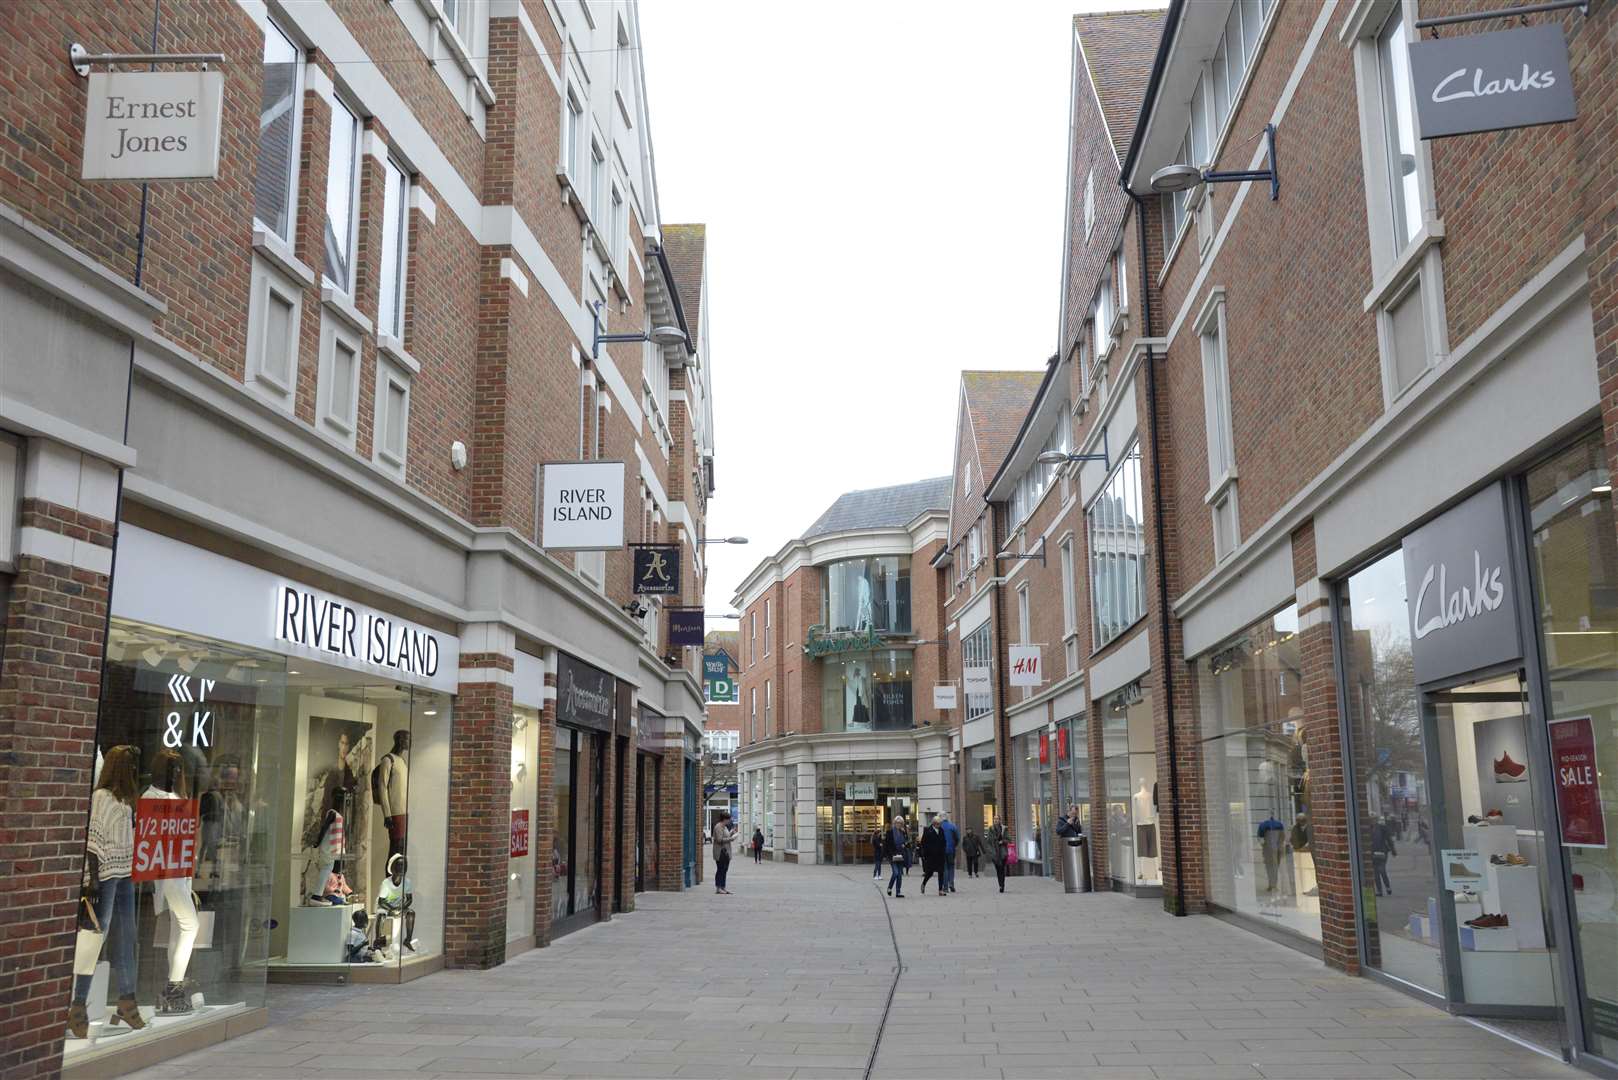 The Whitefriars Shopping Centre in Canterbury